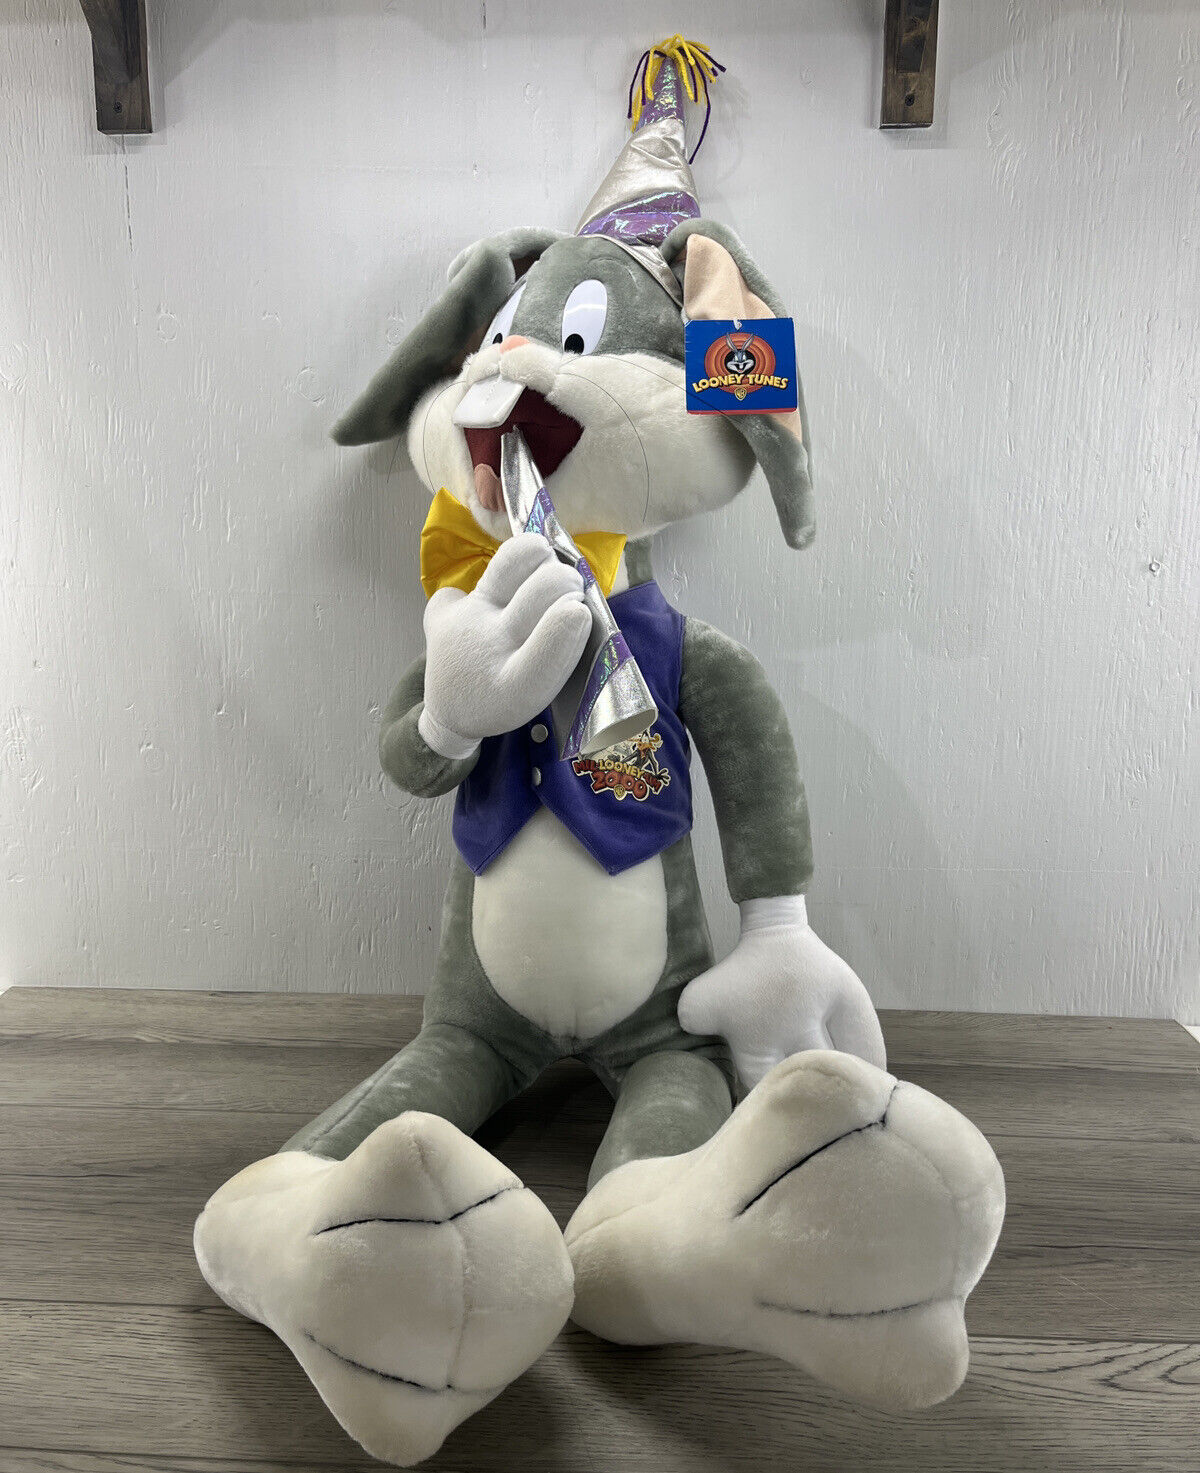 Rare 1999 48” Bugs Bunny Mil-LOONEY-um New Years (2000) Plush with Tag